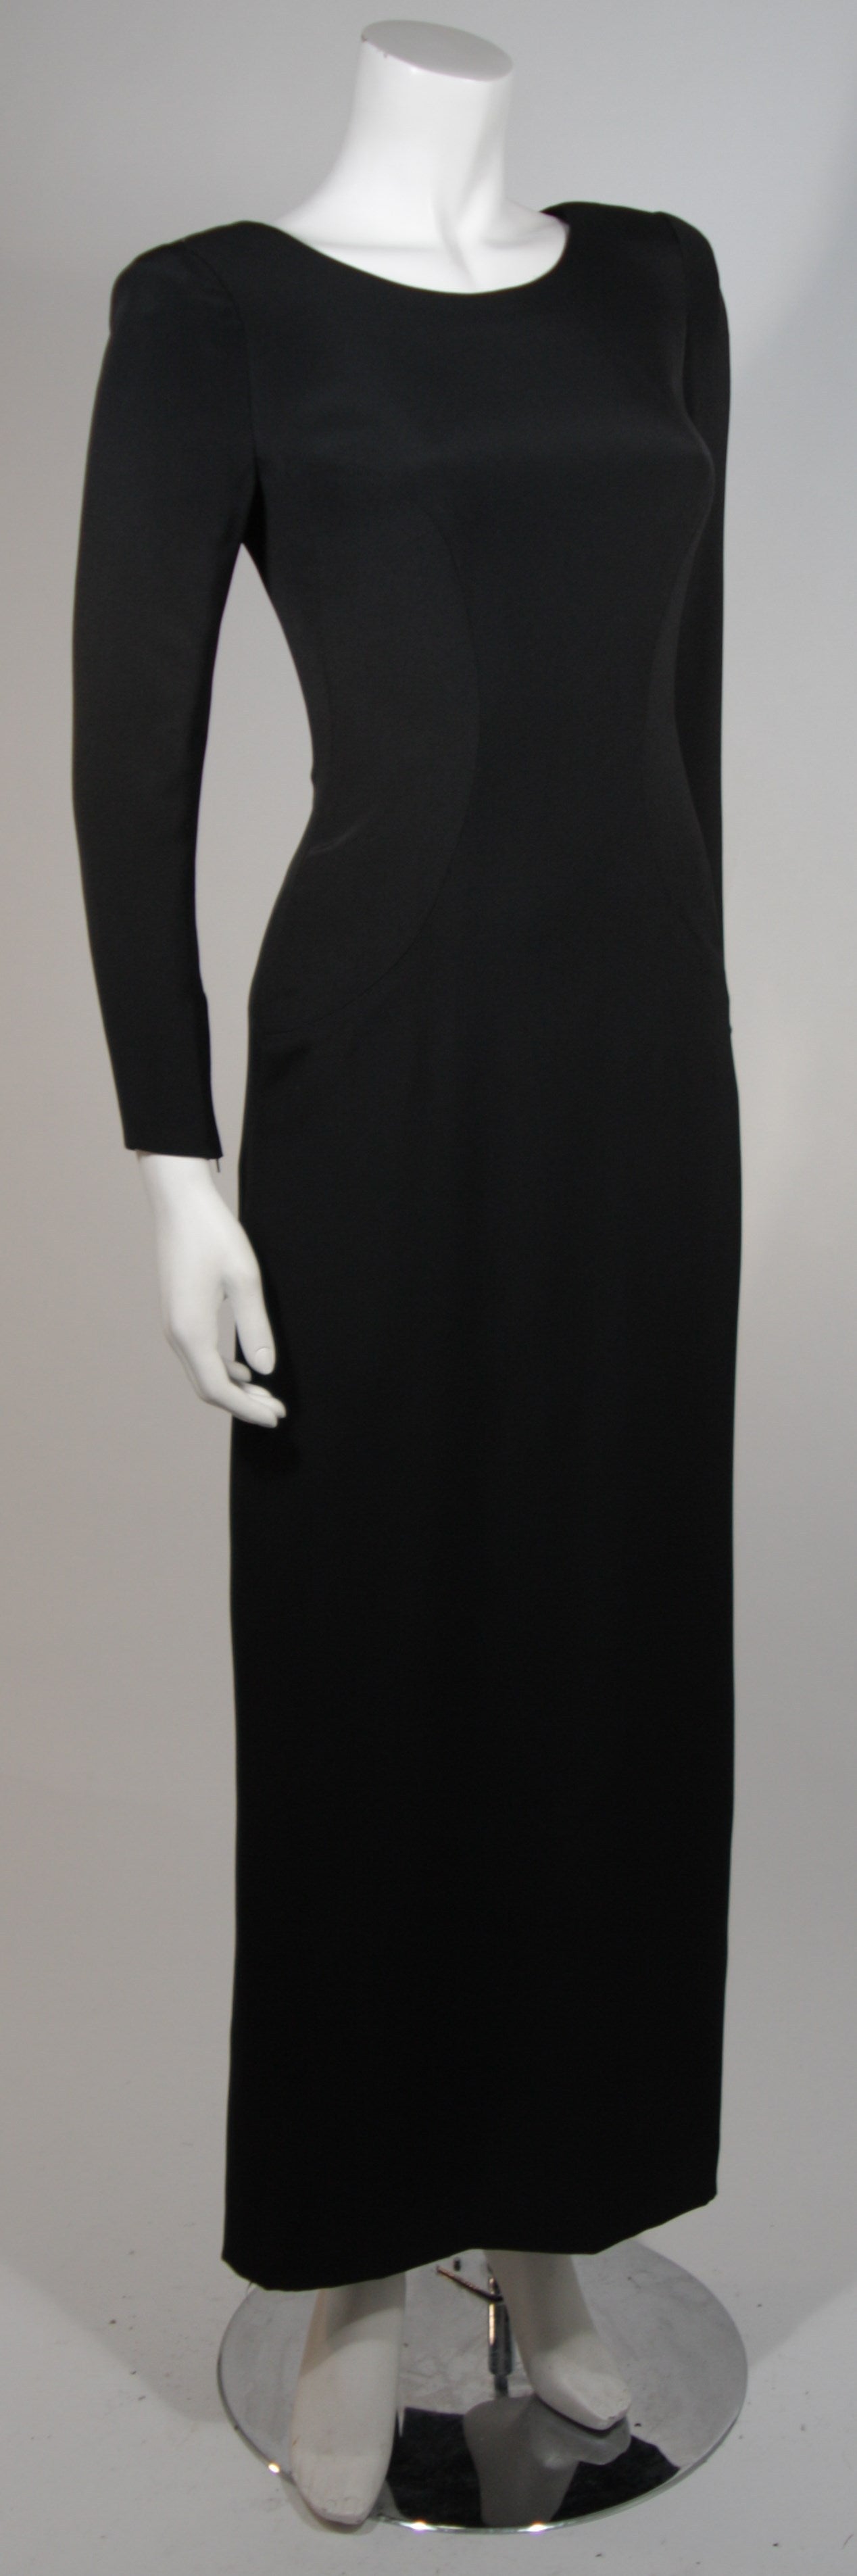 This Chanel gown is available for viewing at our Beverly Hills Boutique. The gown is composed of a black silk crepe. There is a v-back design with buttons and zippers at the wrists. The shoulders are padded. Garment is numbered. Made in France.